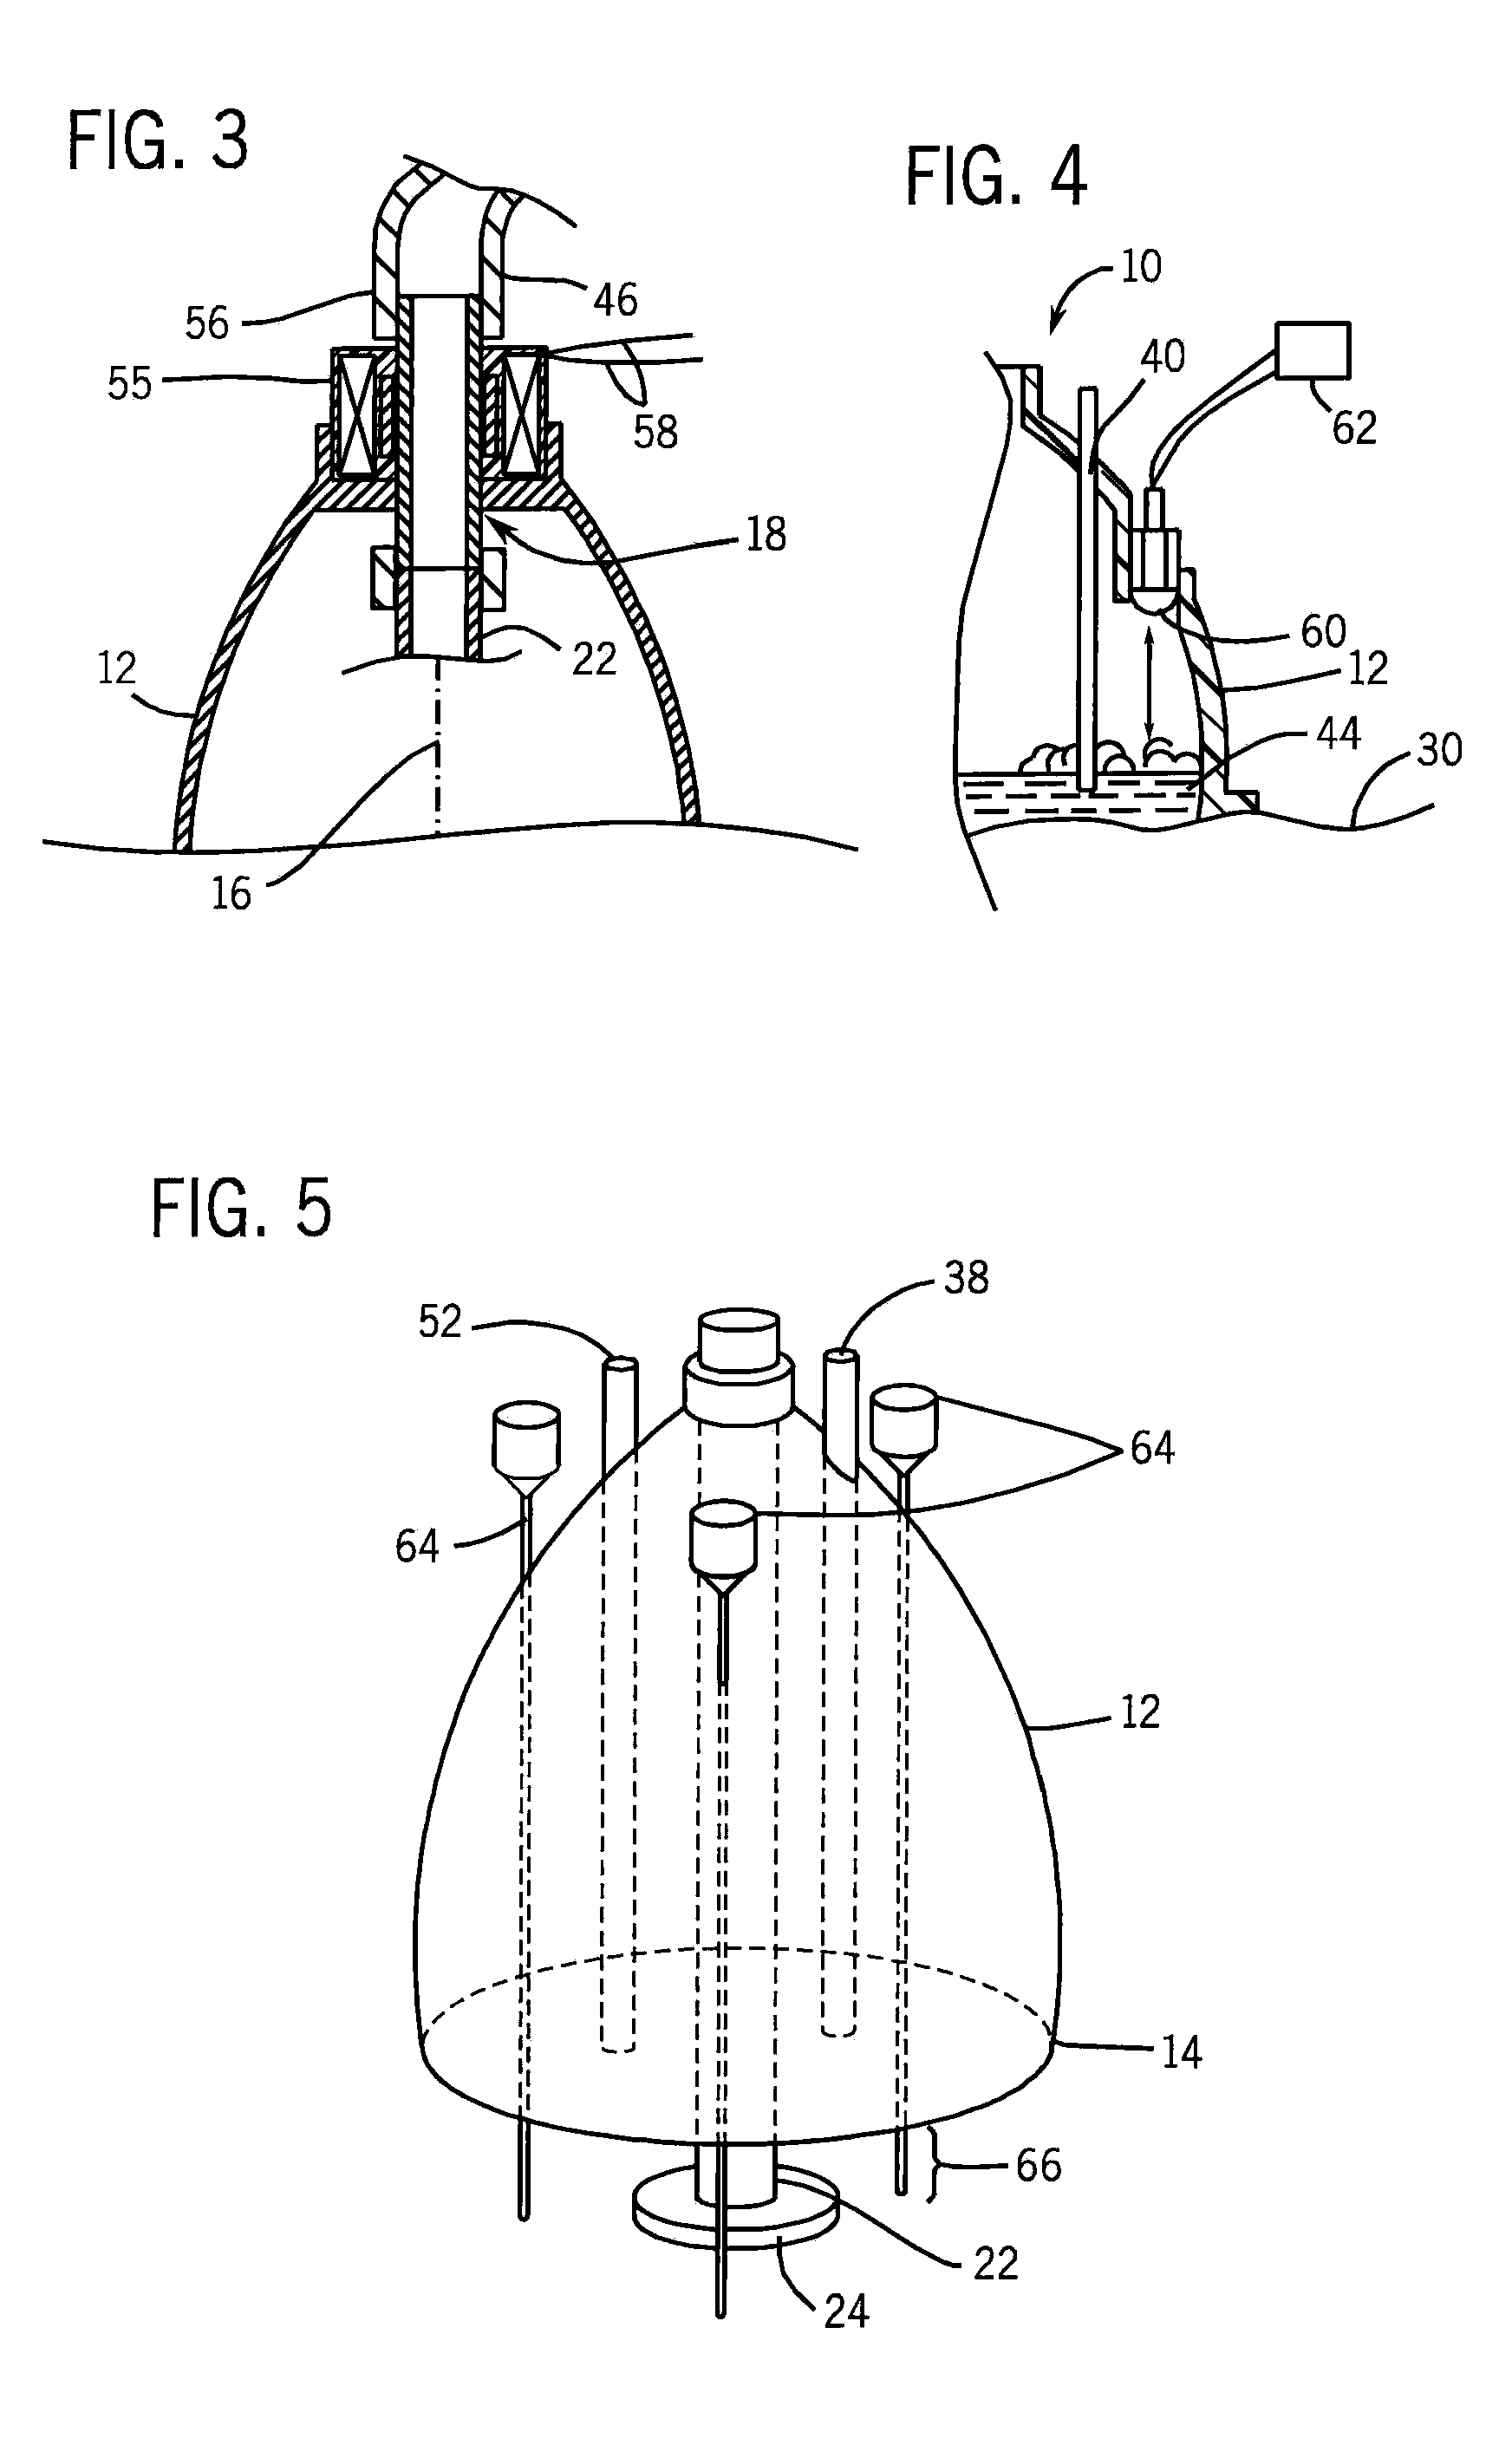 Device for Treatment of Venous Congestion